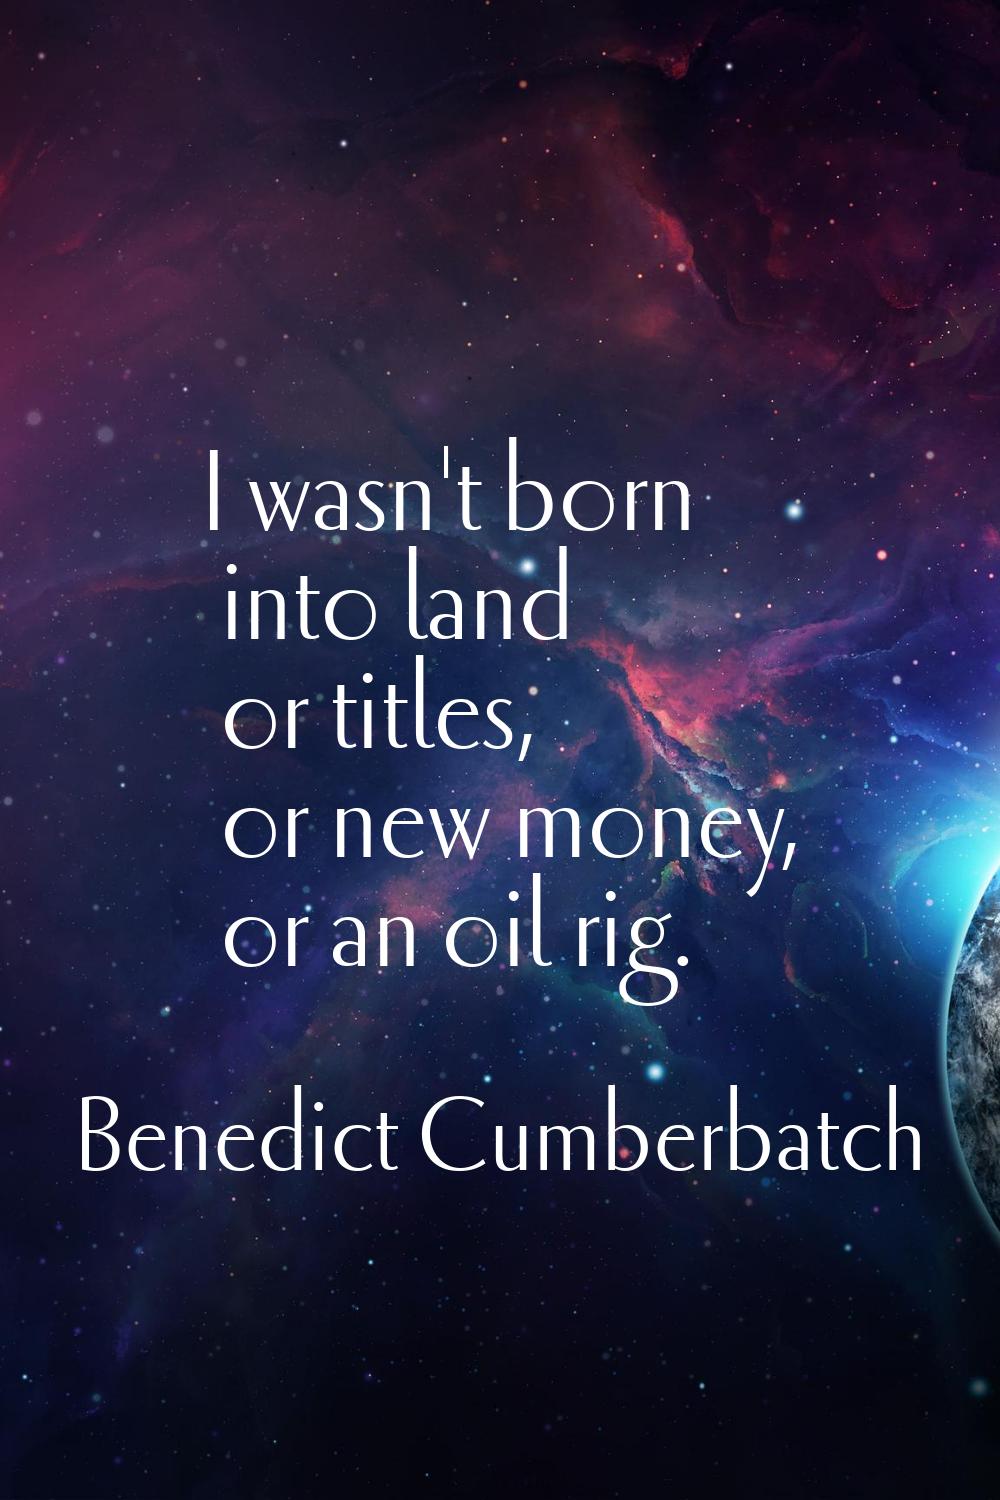 I wasn't born into land or titles, or new money, or an oil rig.